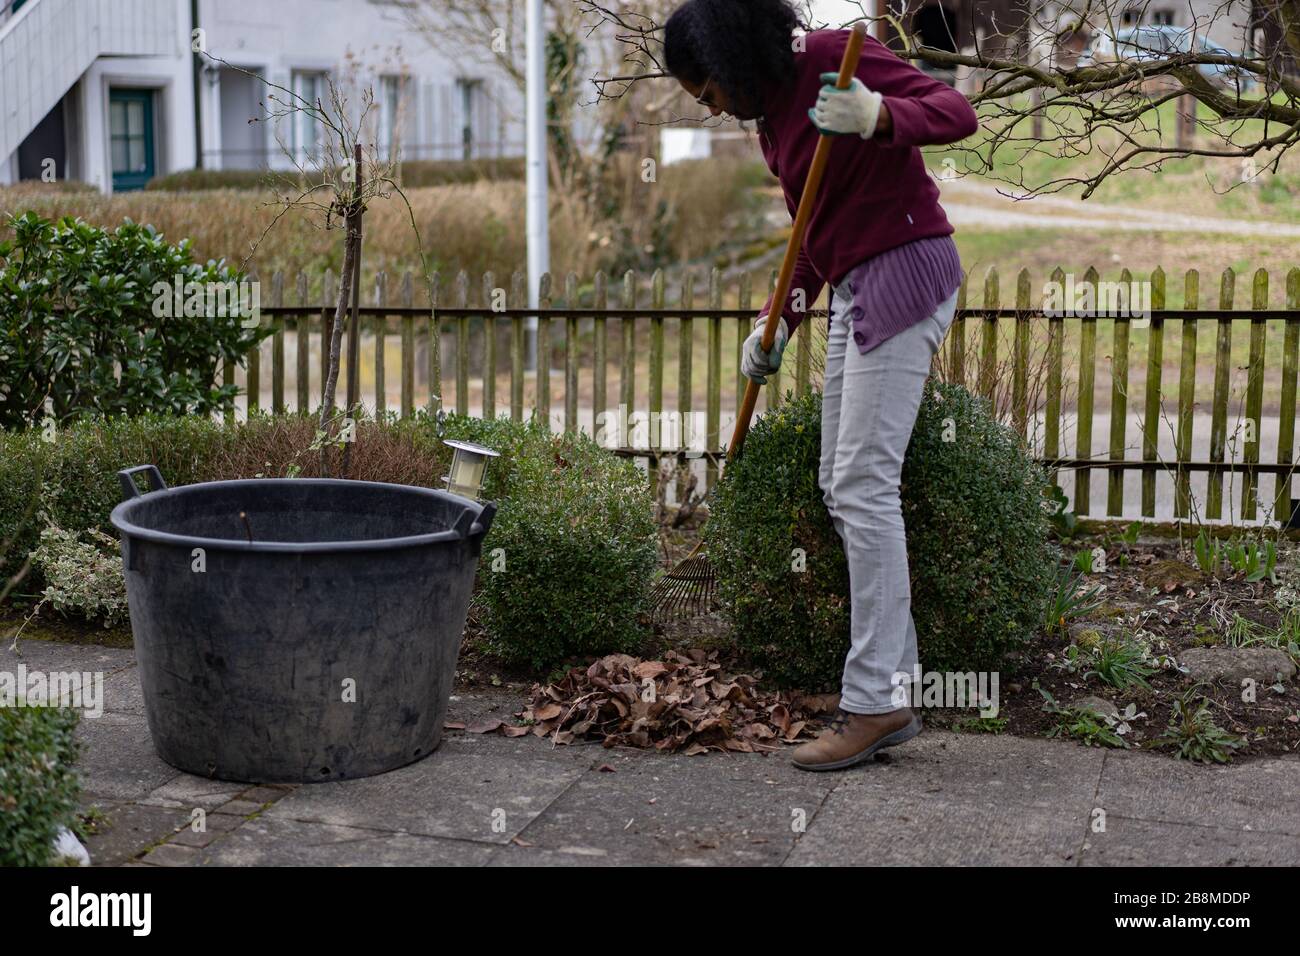 Young woman is raking leaves with garden rake, cleaning footpath and flowerbed in early springtime in front yard. Portrait of gardening woman. Stock Photo